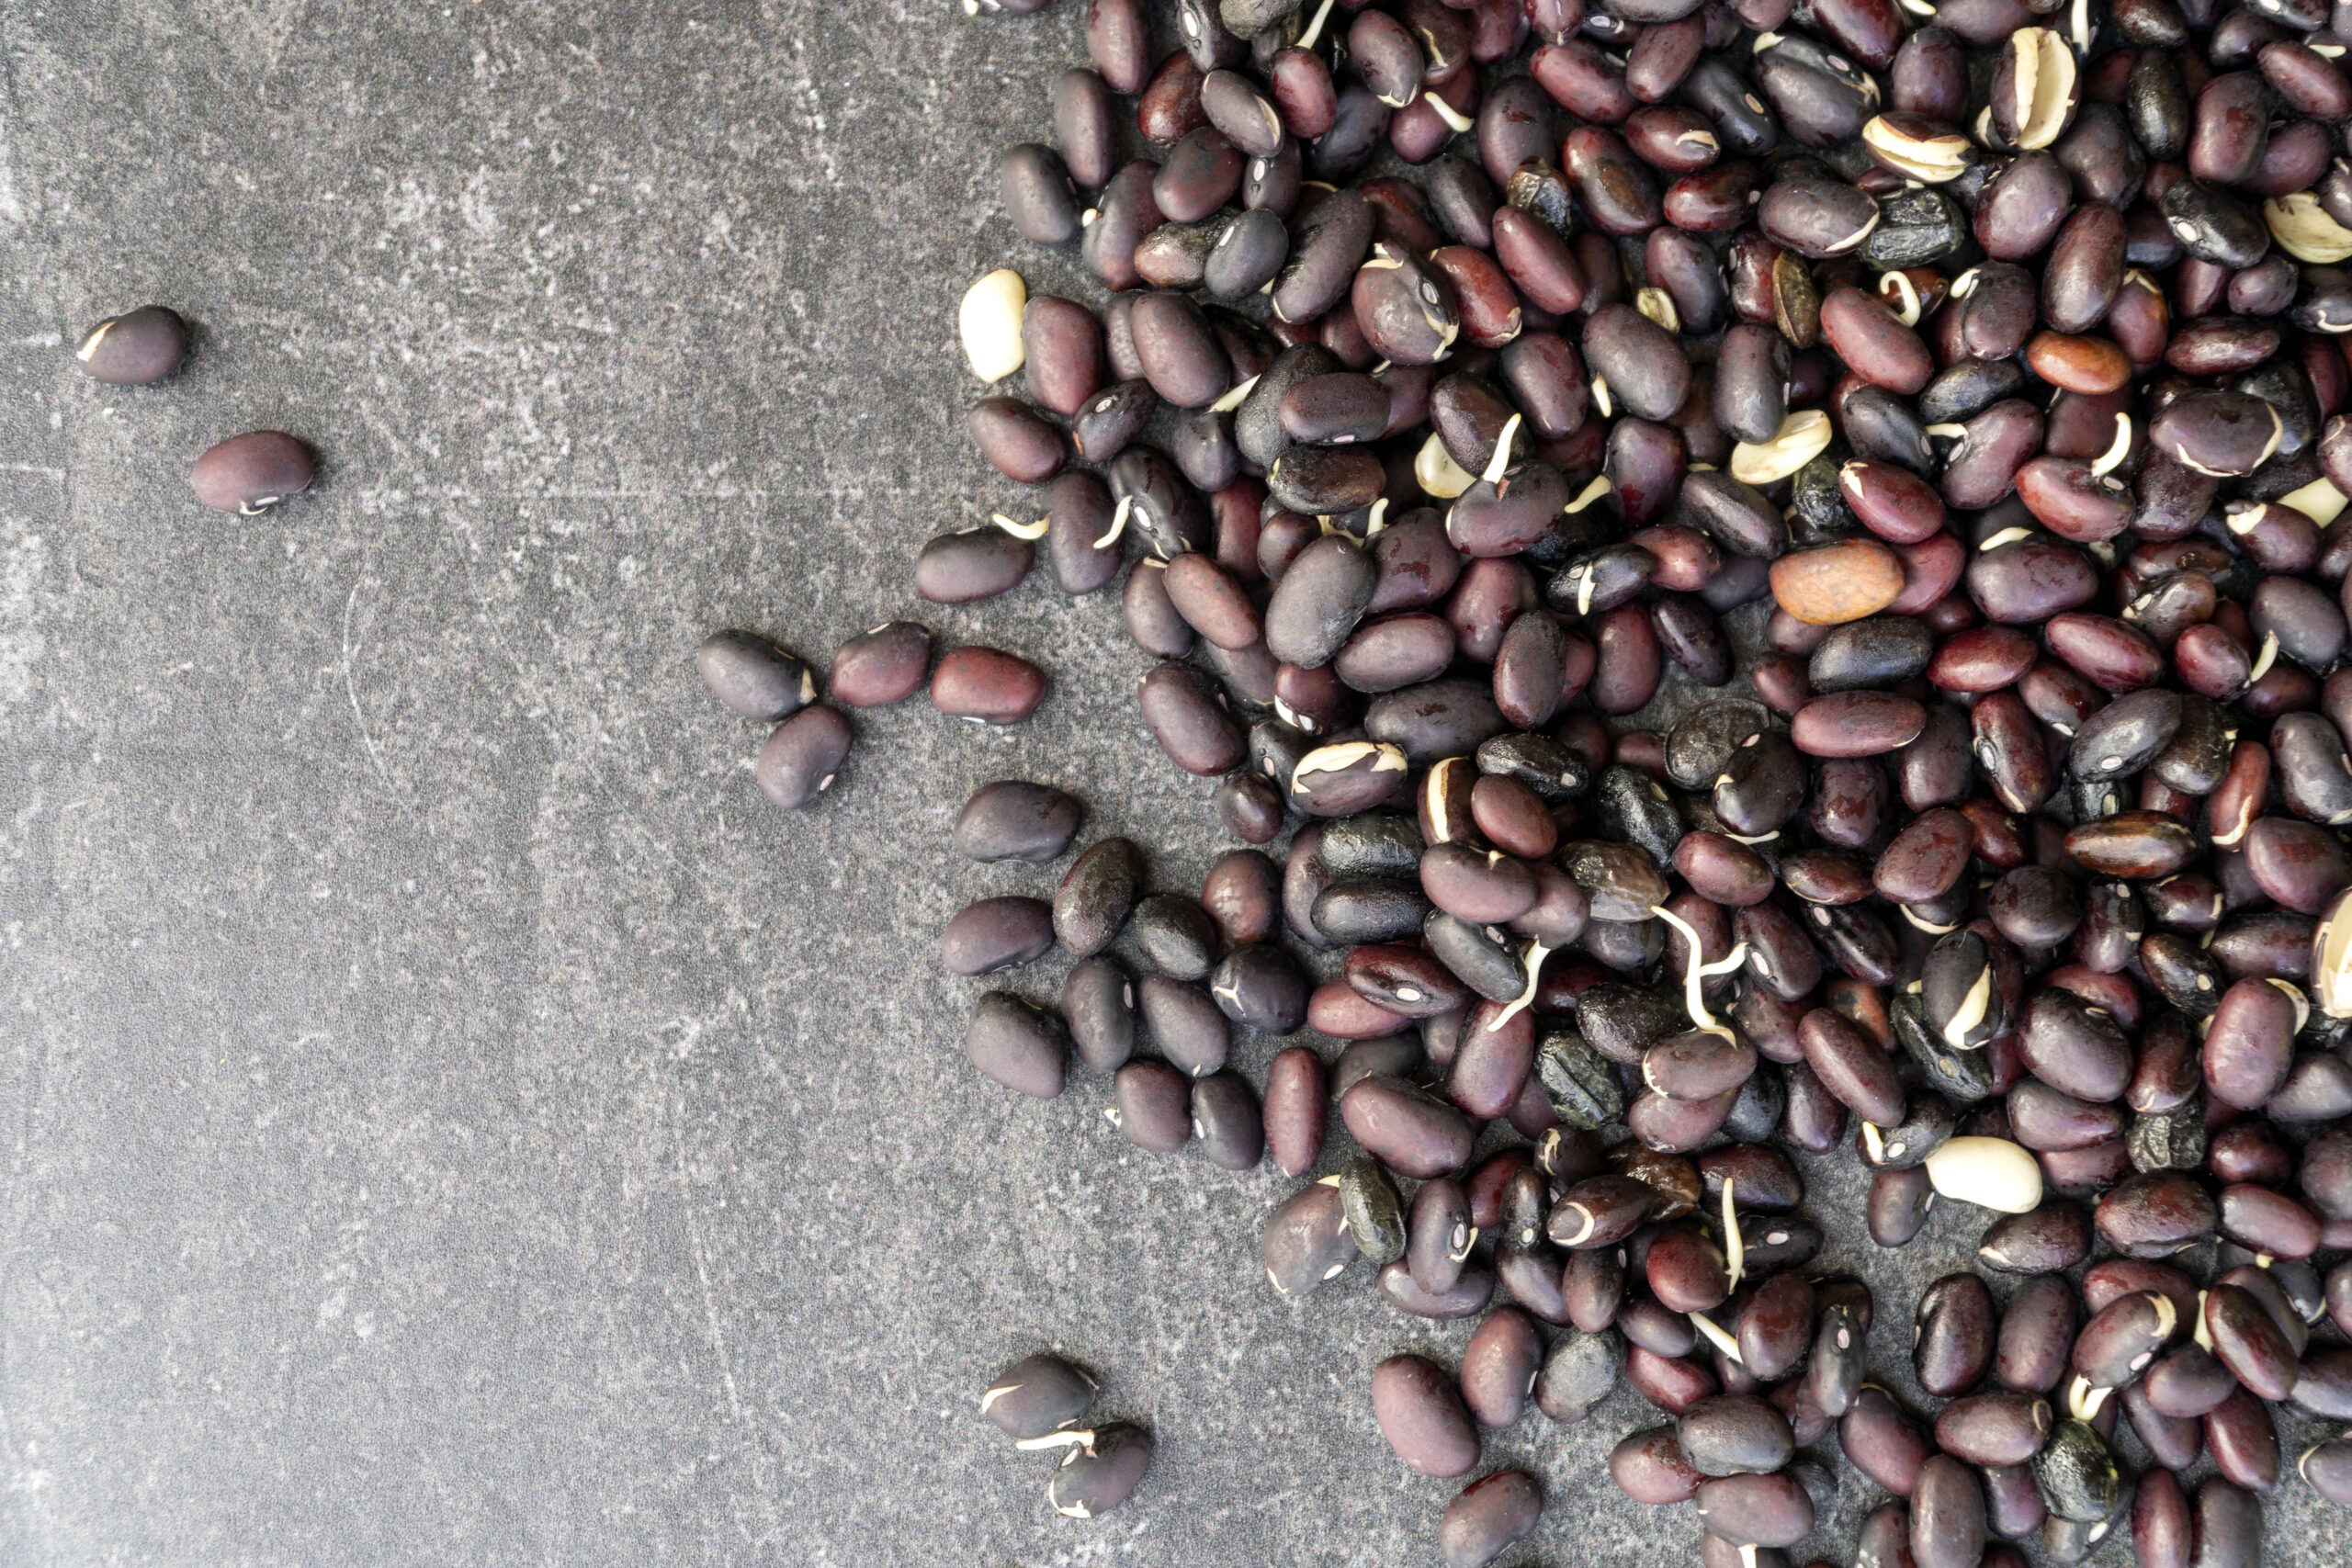 The 9 Healthiest Beans and Legumes You Can Eat